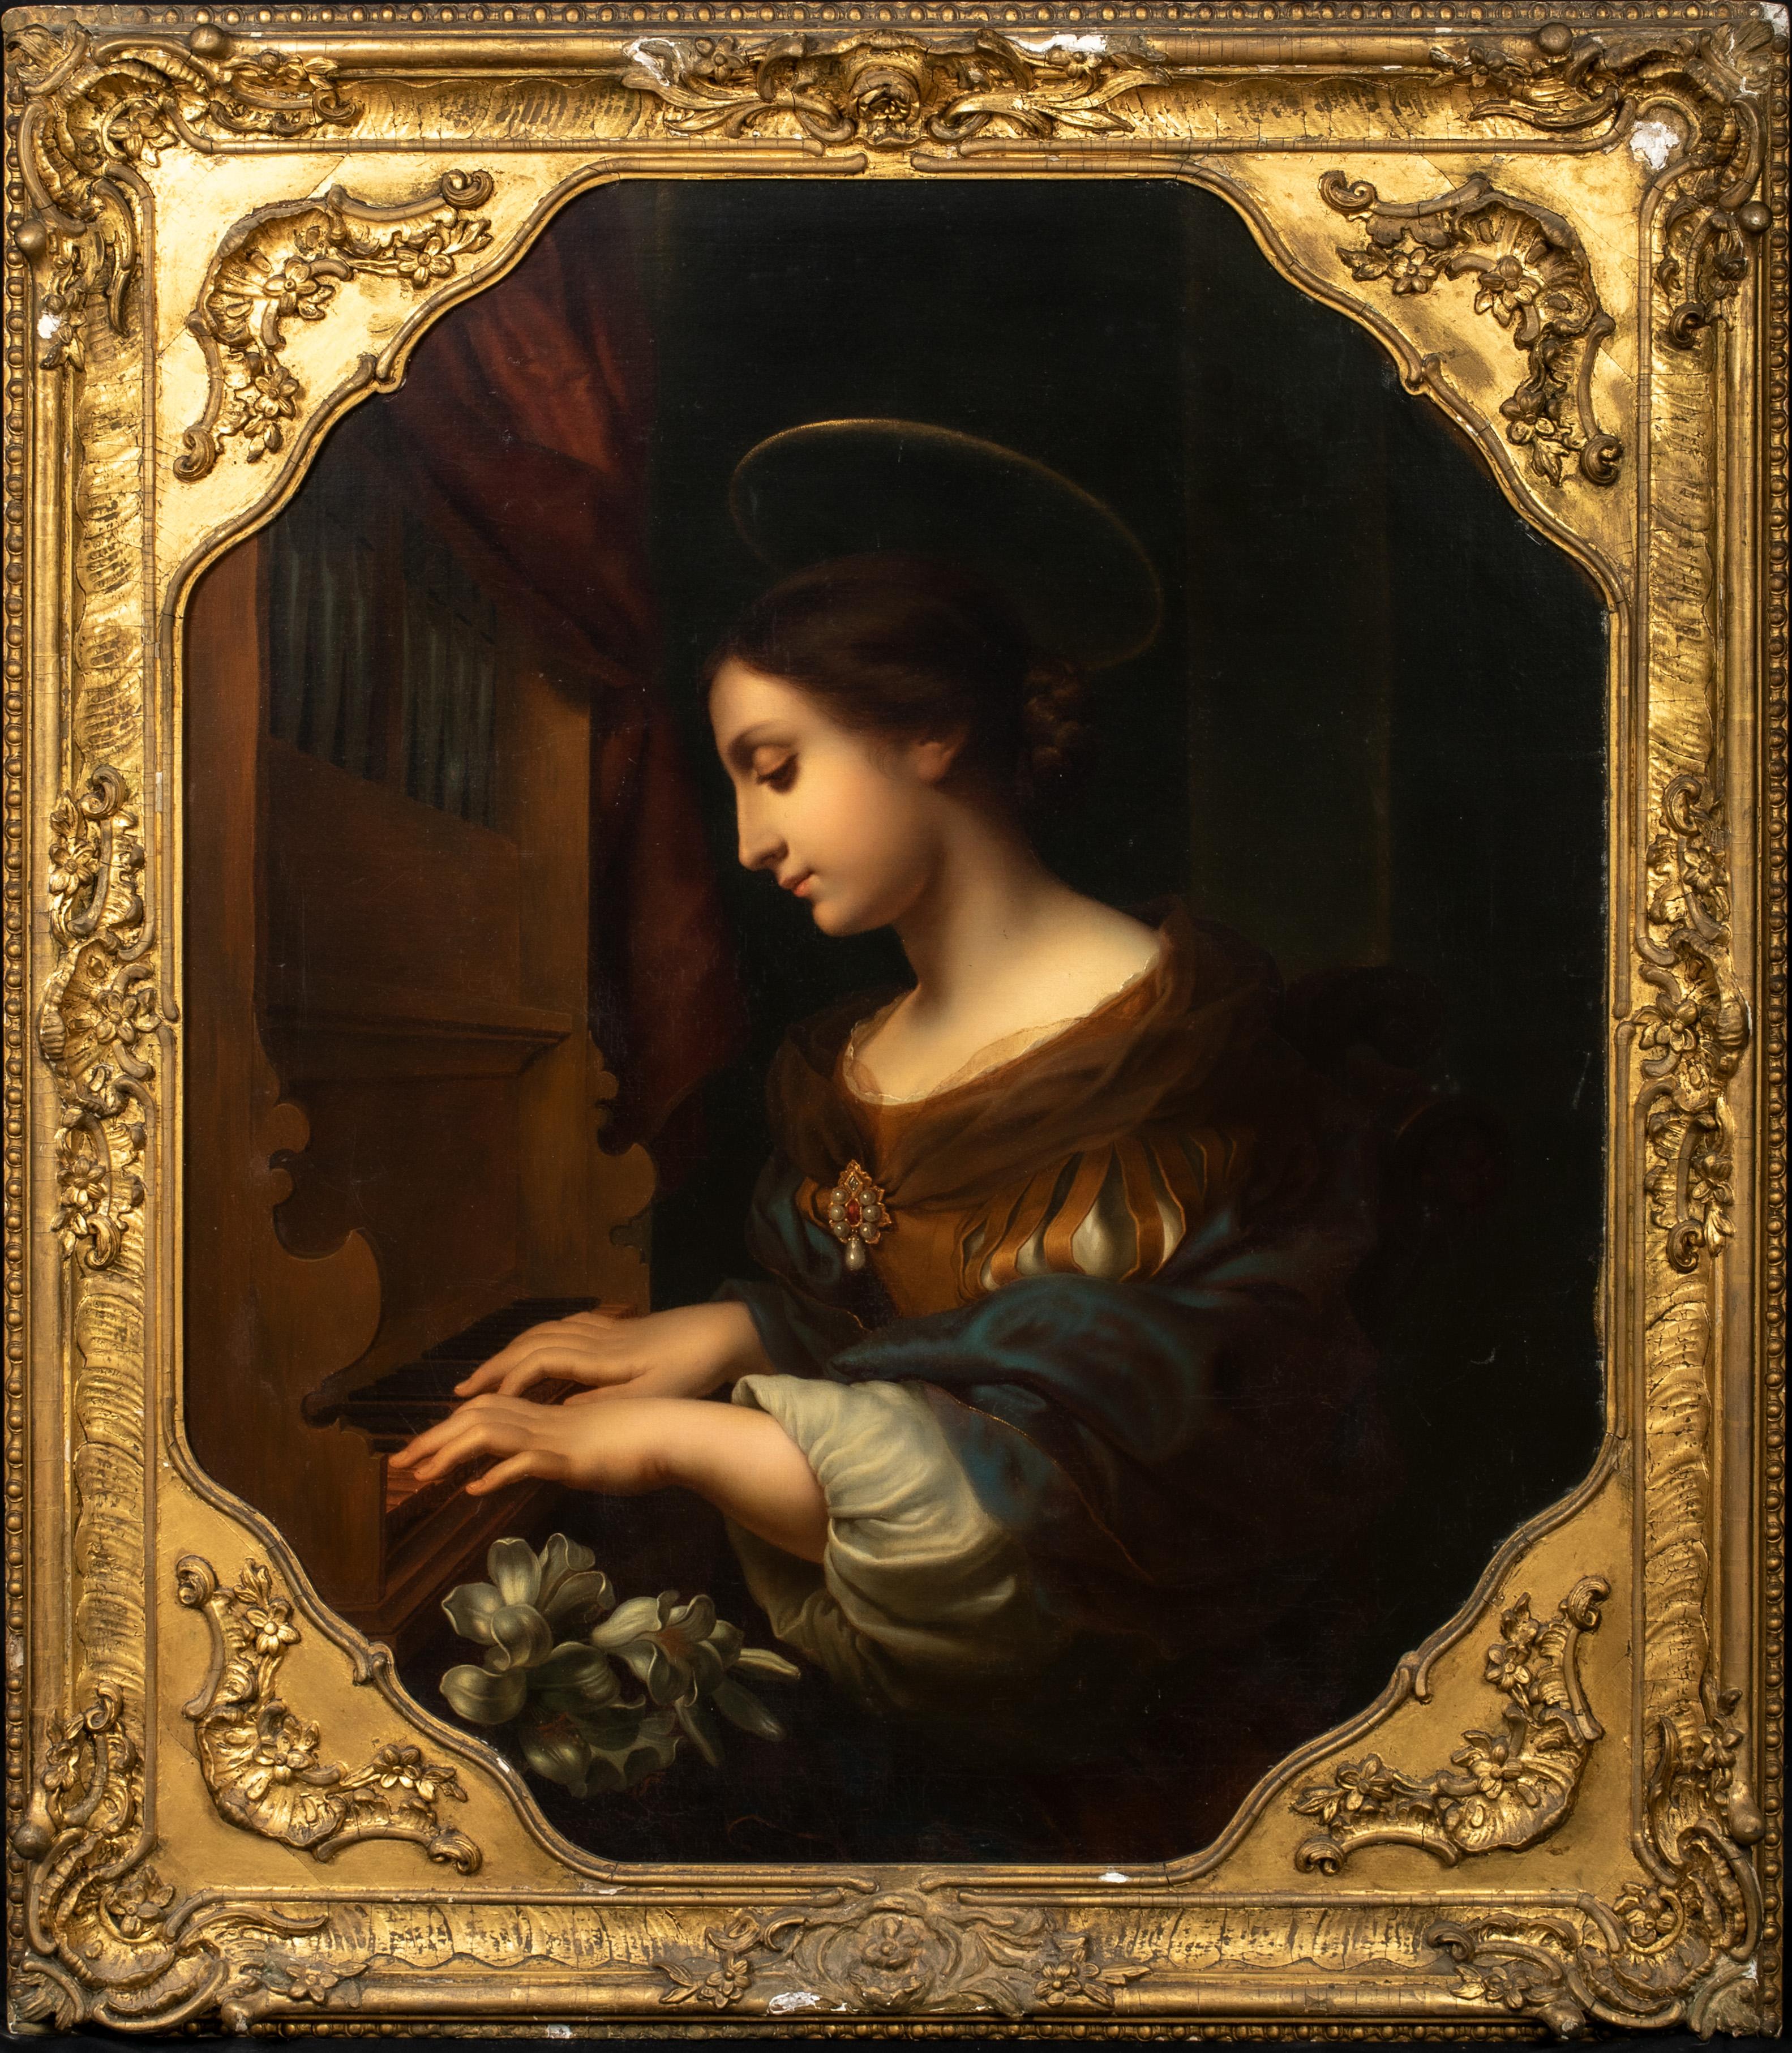 Carlo Dolci Portrait Painting - Saint Cecilia Playing The Piano, 17th Century